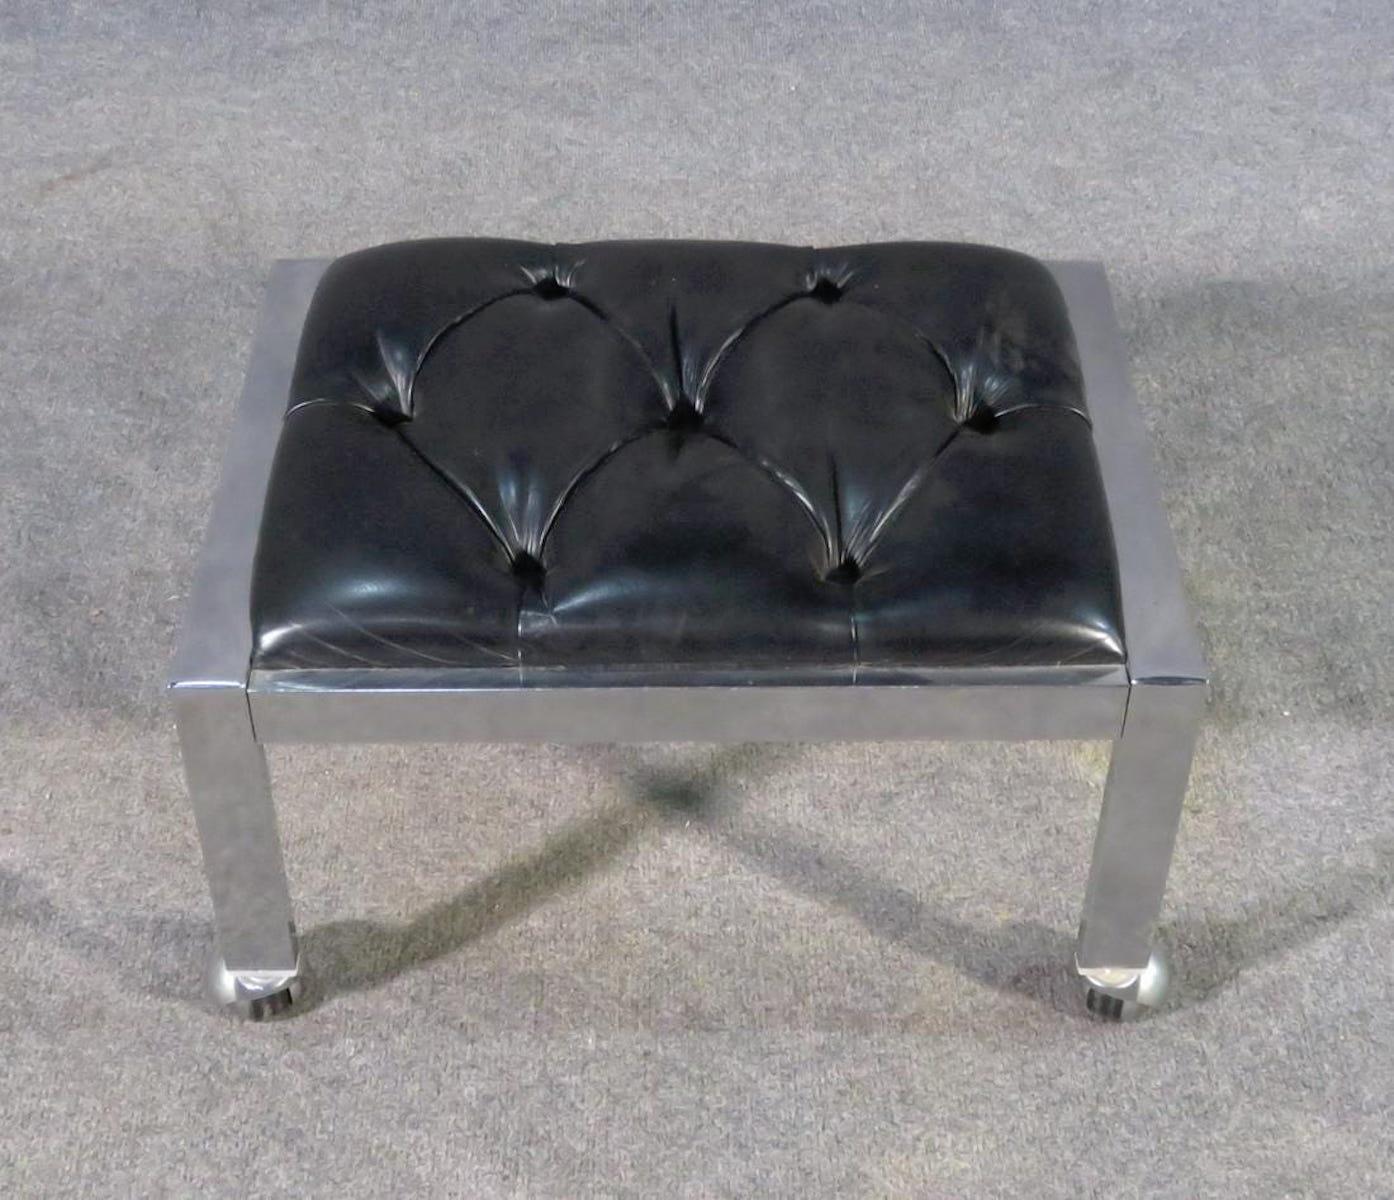 Vintage tufted stool with chrome frame on casters.
(Please confirm item location - NY or NJ - with dealer).
   